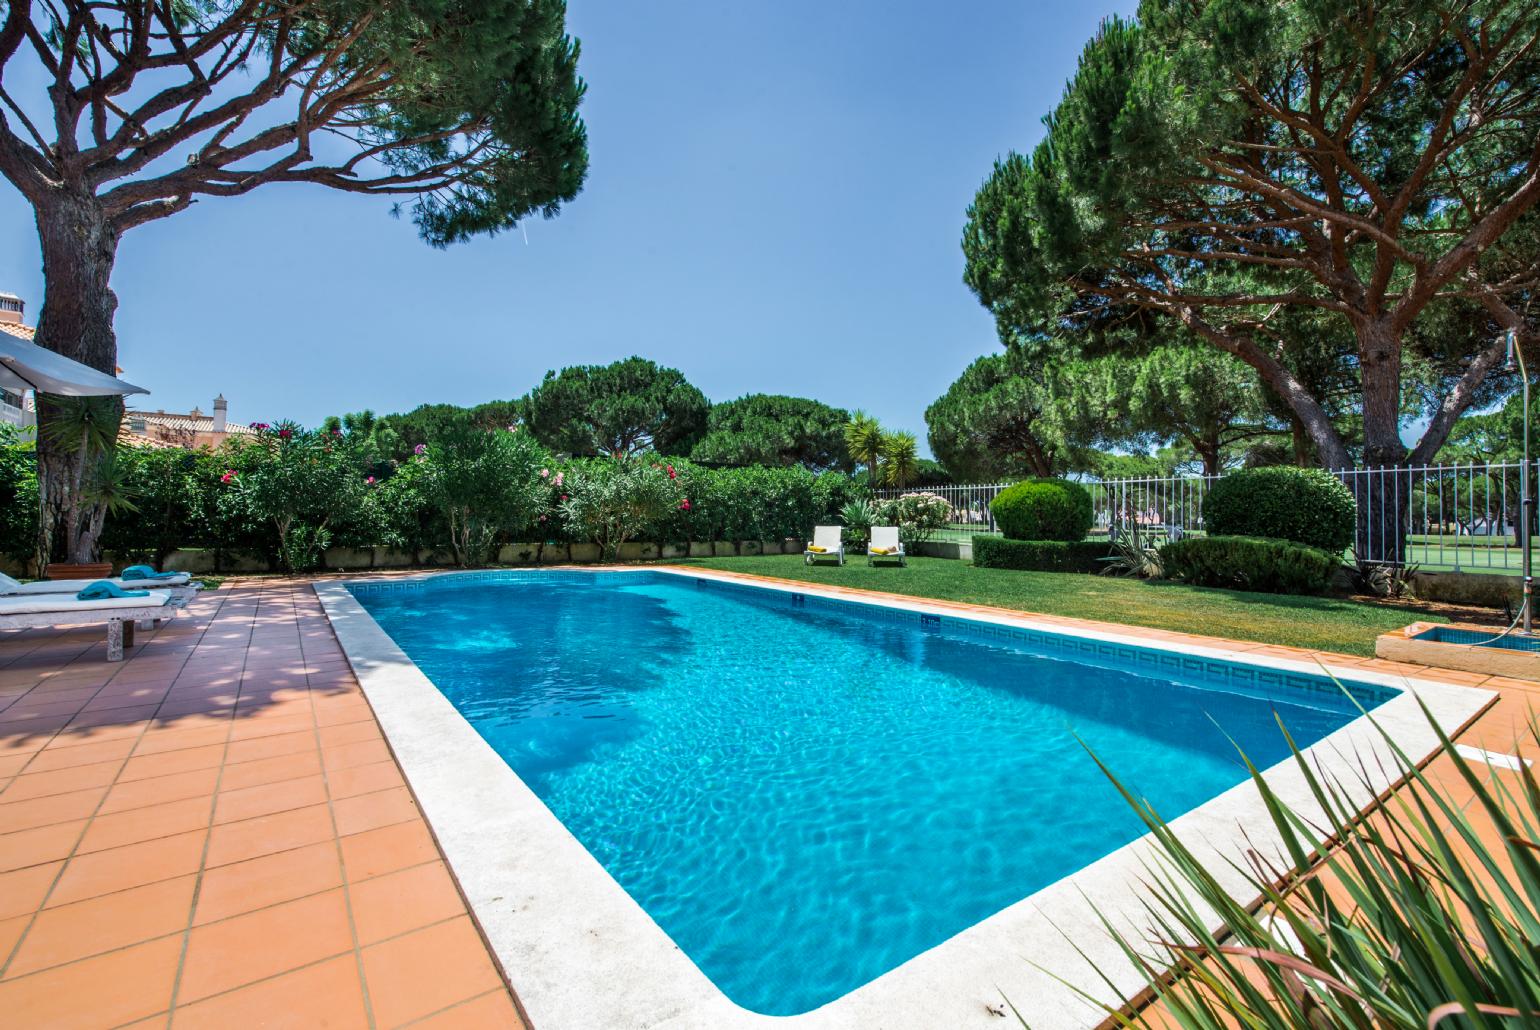 Beautiful villa with private pool and terrace area.